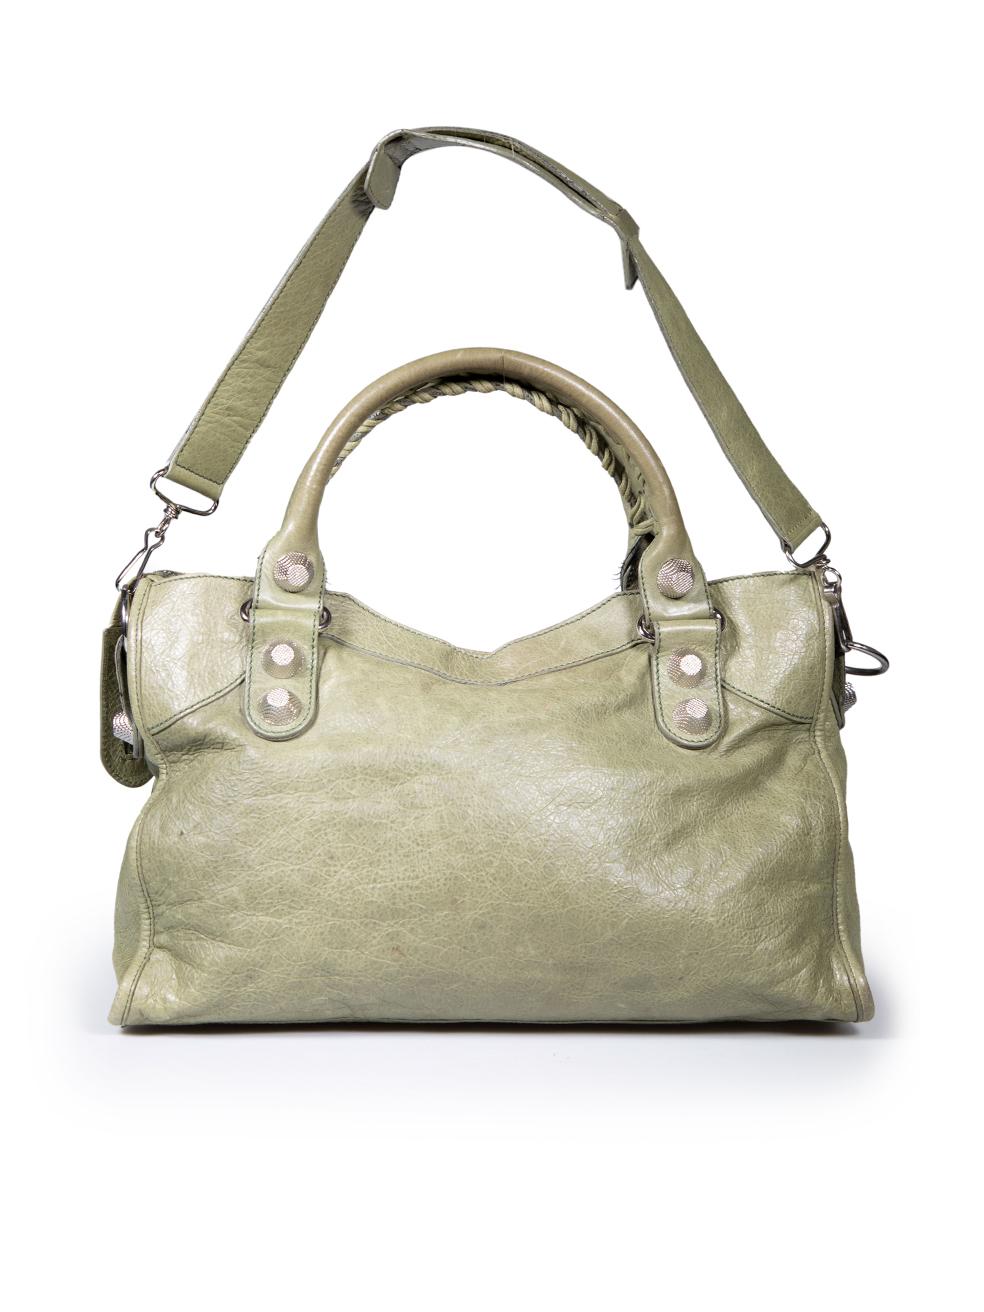 Balenciaga Green Leather Small Classic City Bag In Good Condition For Sale In London, GB